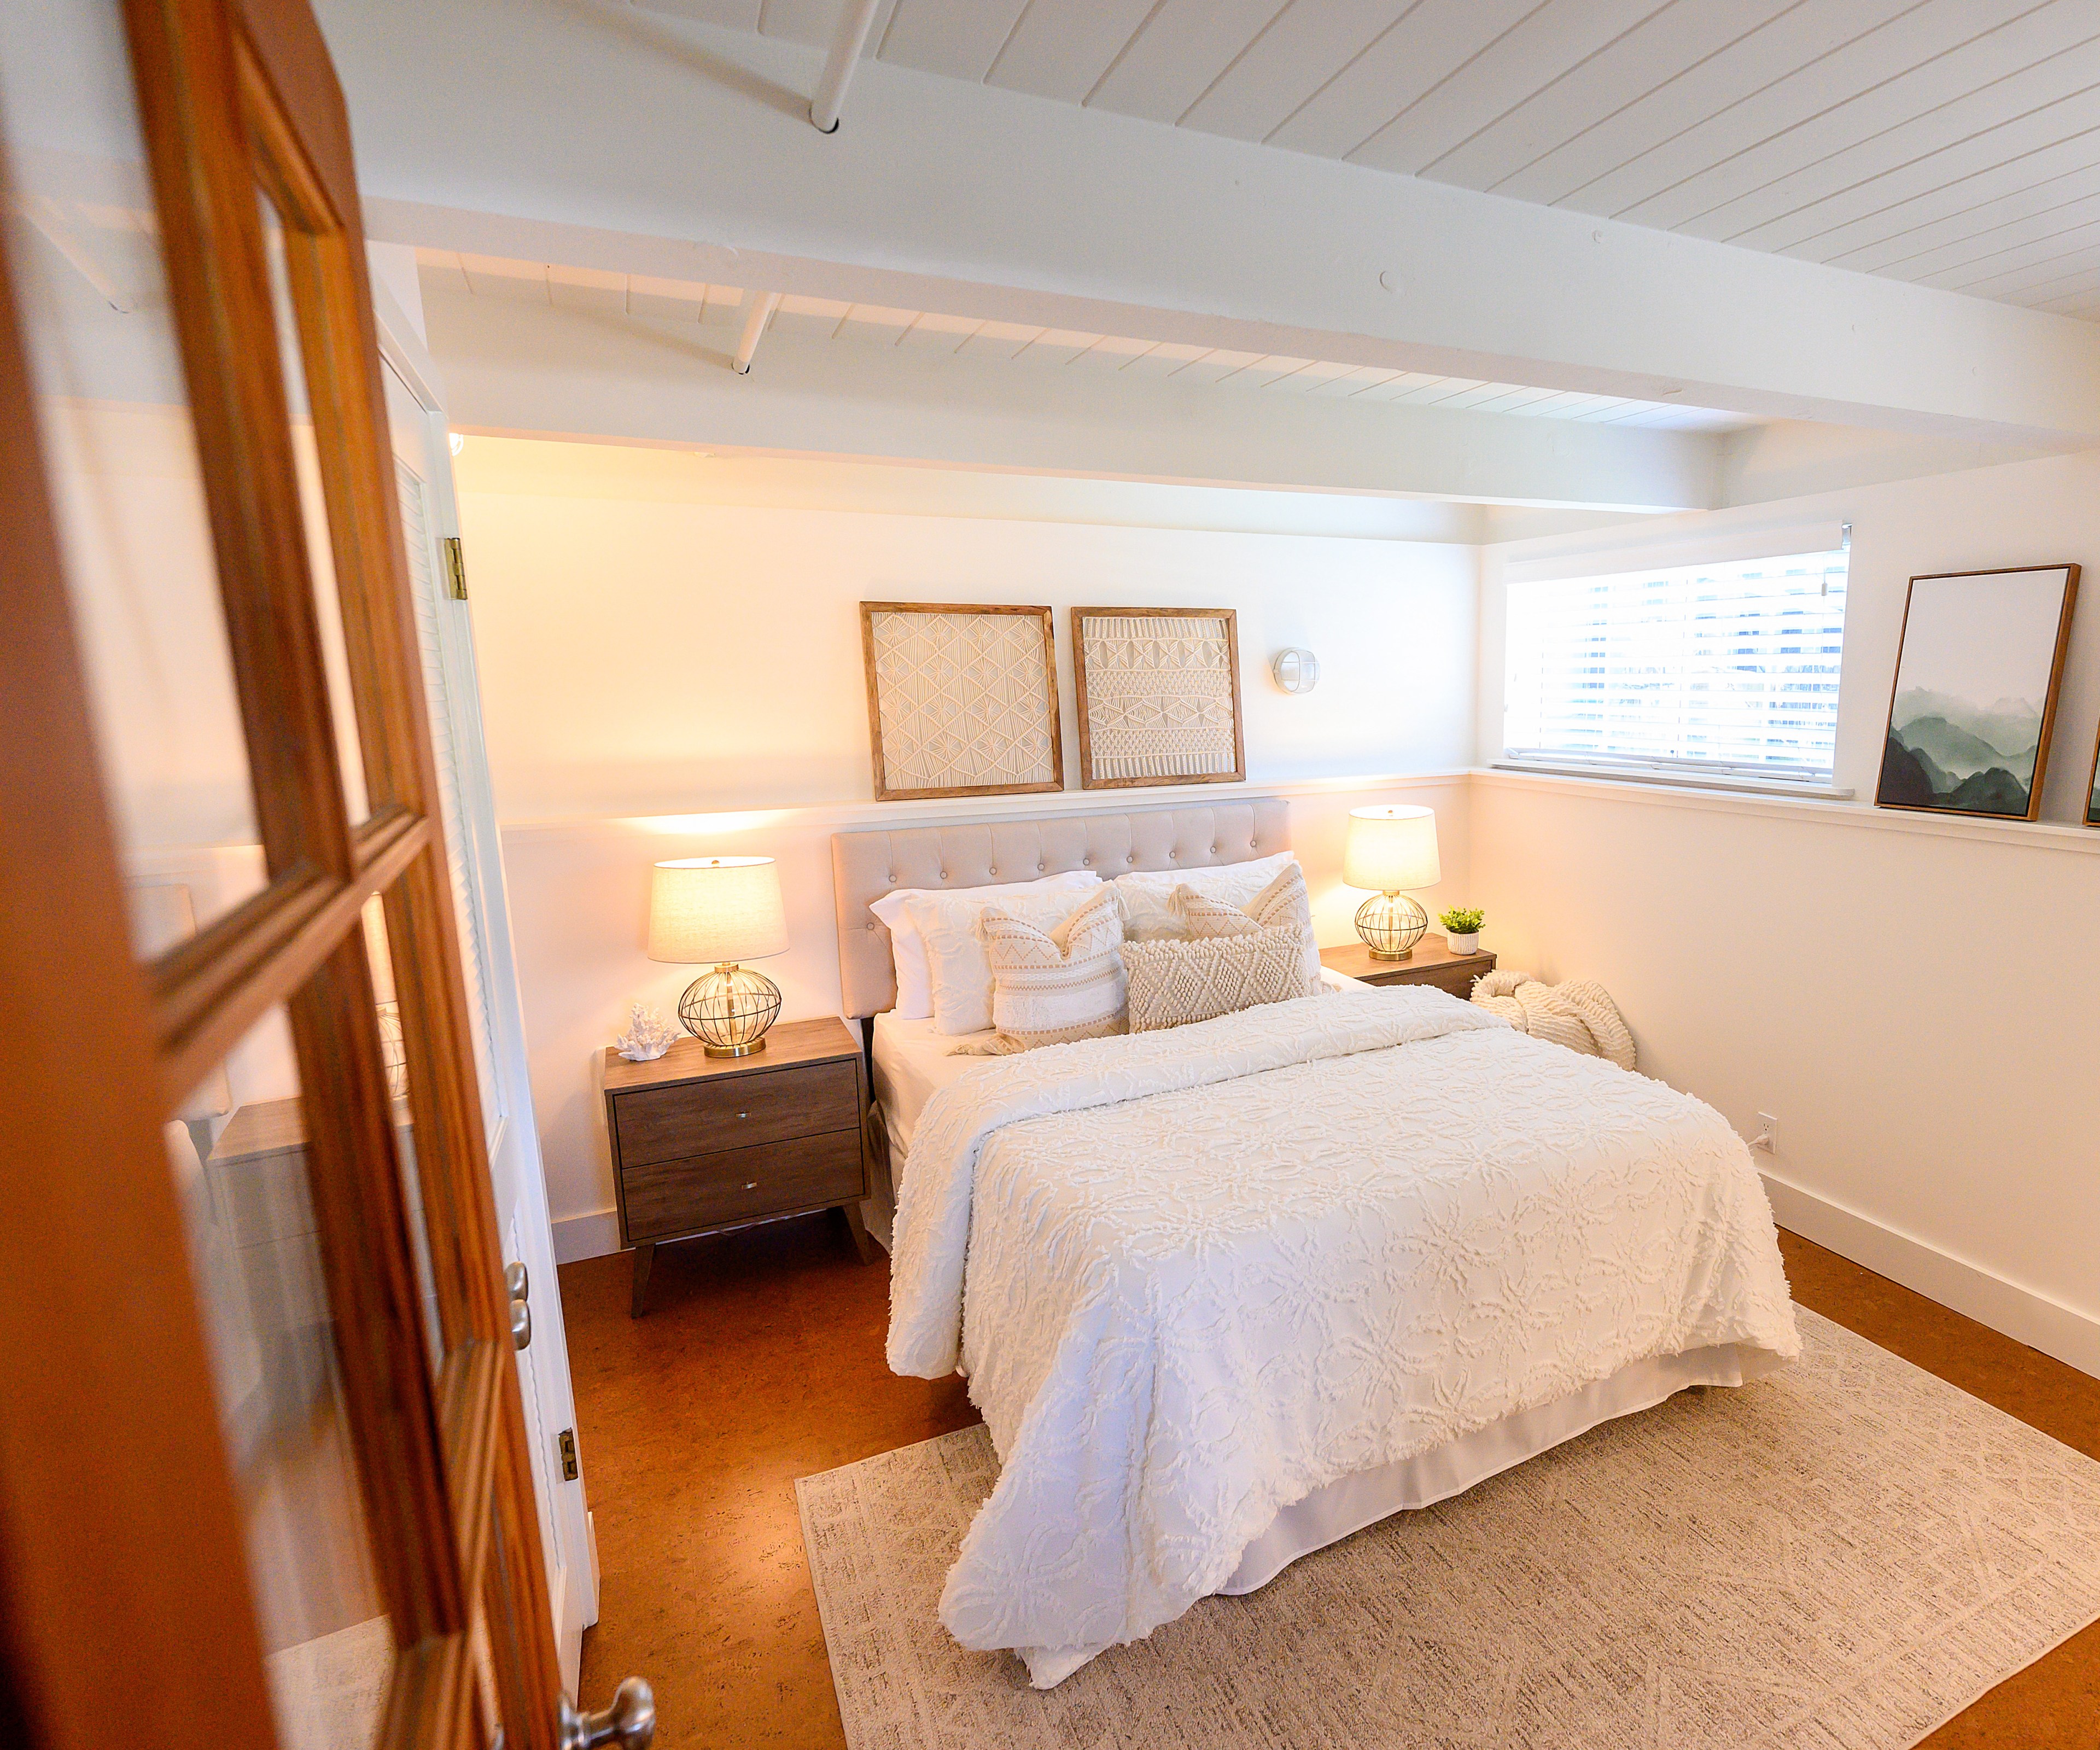 A cozy, well-lit bedroom with a white bed, two nightstands with lamps, and decorative art.